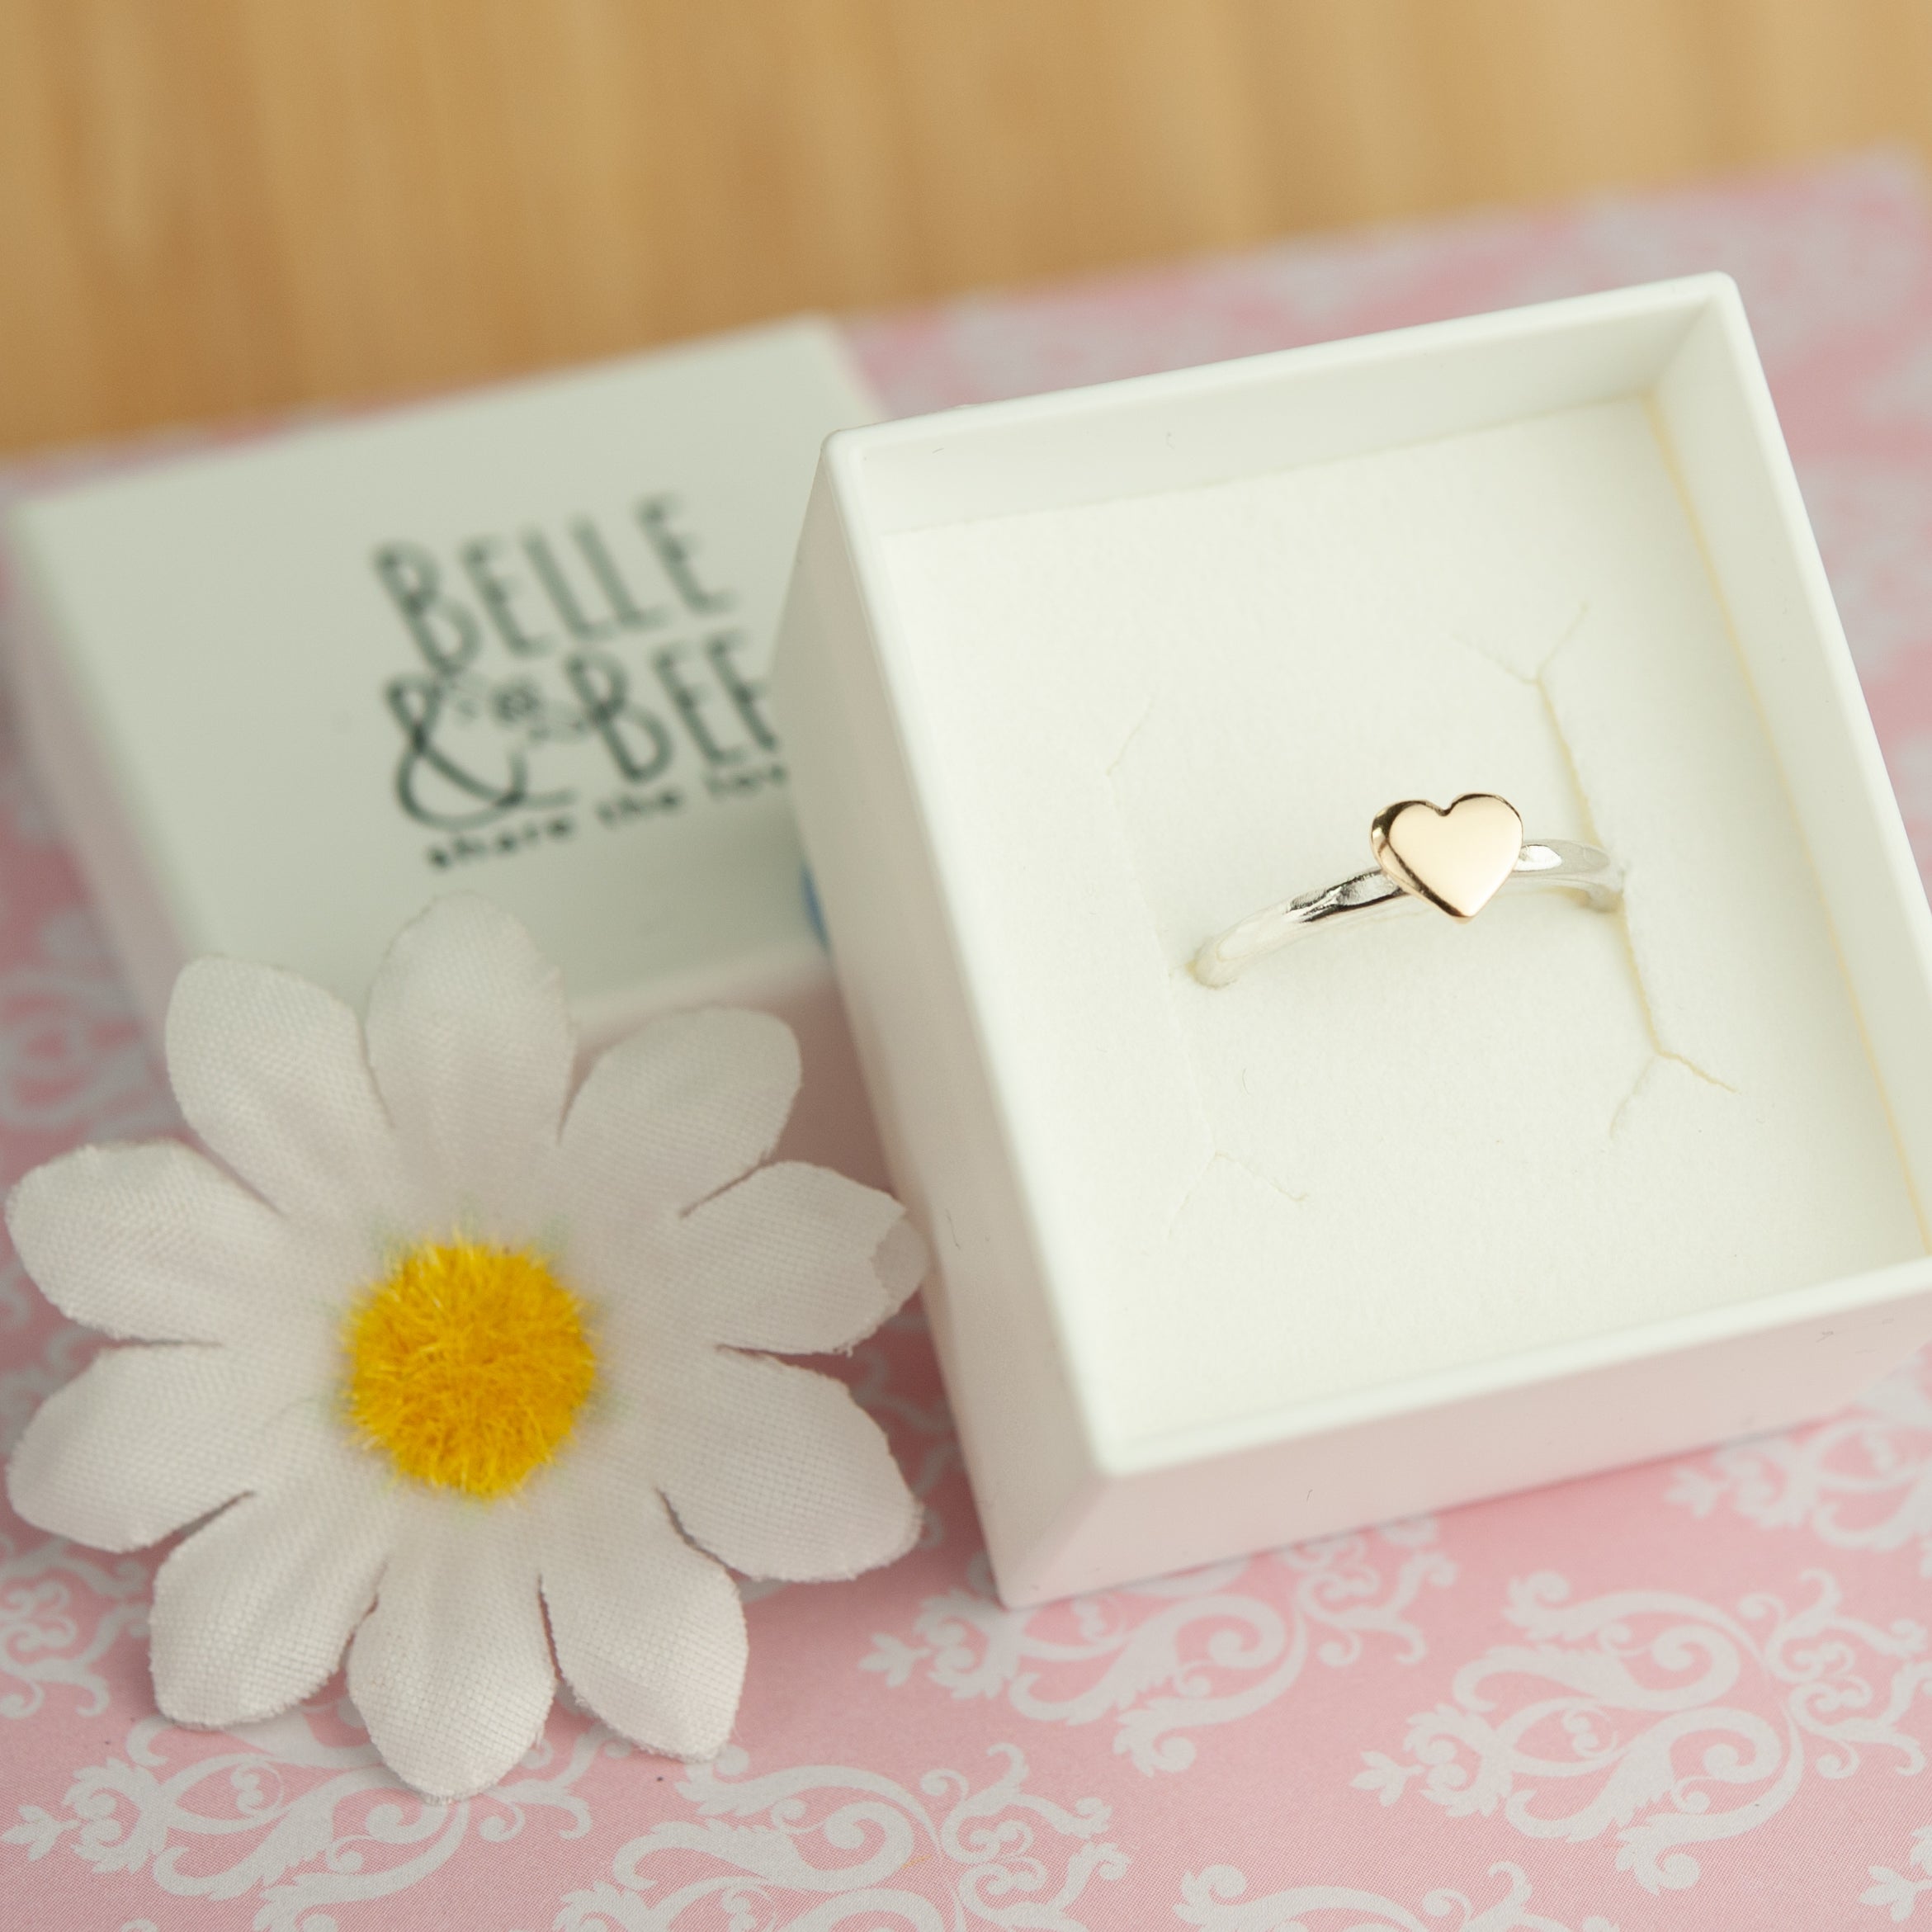 Belle & Bee Gold heart stack ring